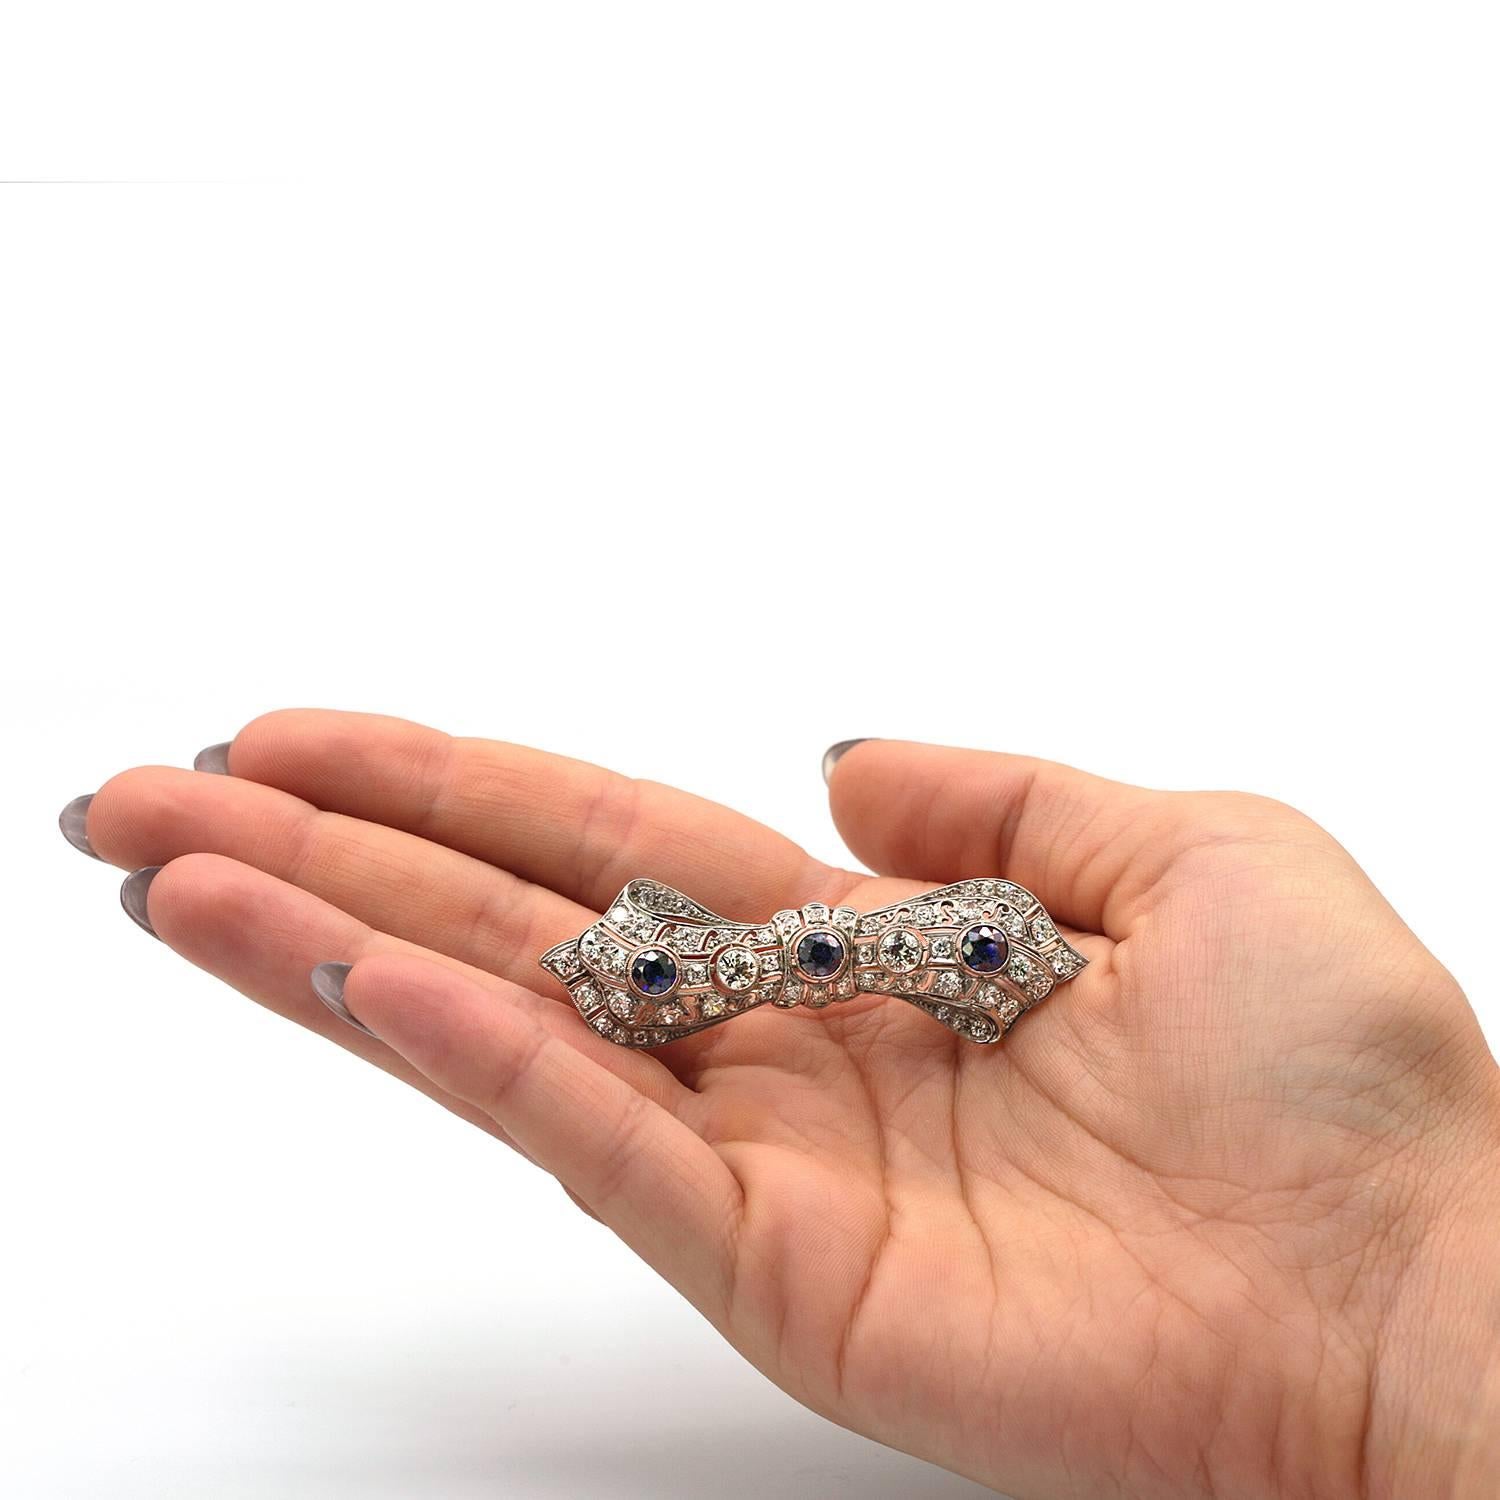 Art Deco Platinum  Brooch has approximately 2 1/2 carats of beautiful old mine cut diamonds with 3 round sapphires weighing approximately 1 1/2 carats. 